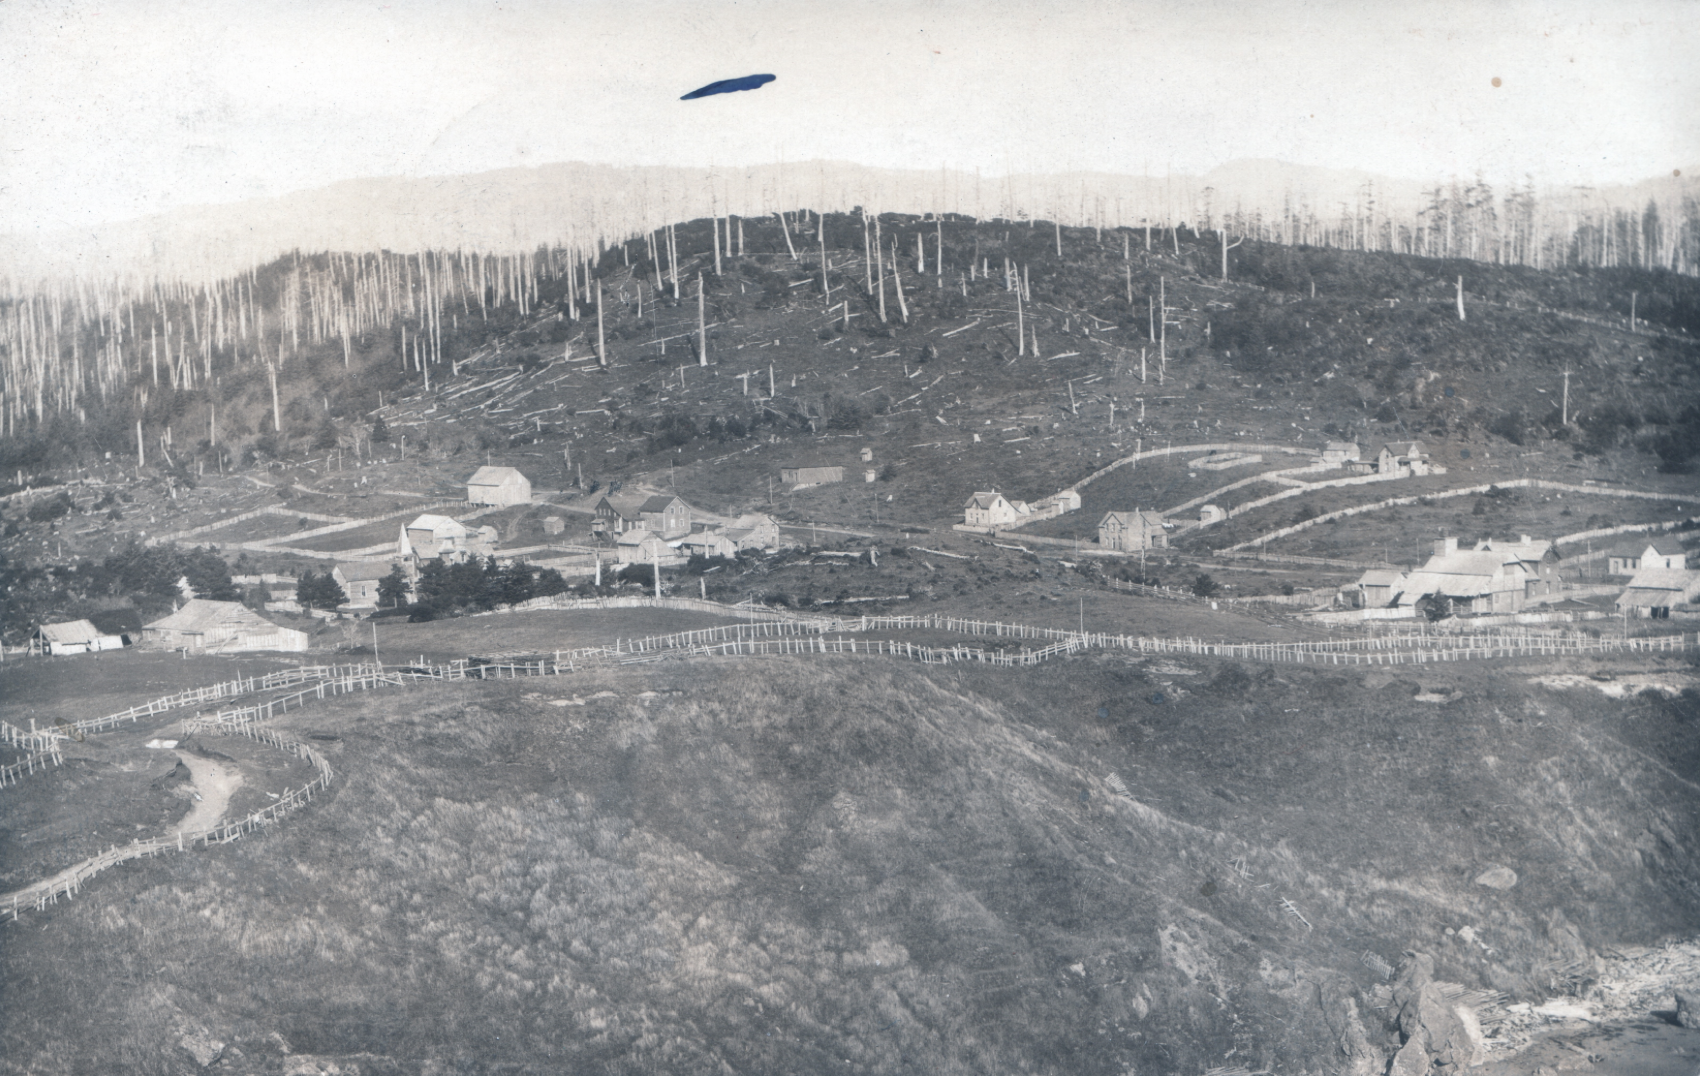 The snags from the 1868 fire are visible in this photo taken in 1902.